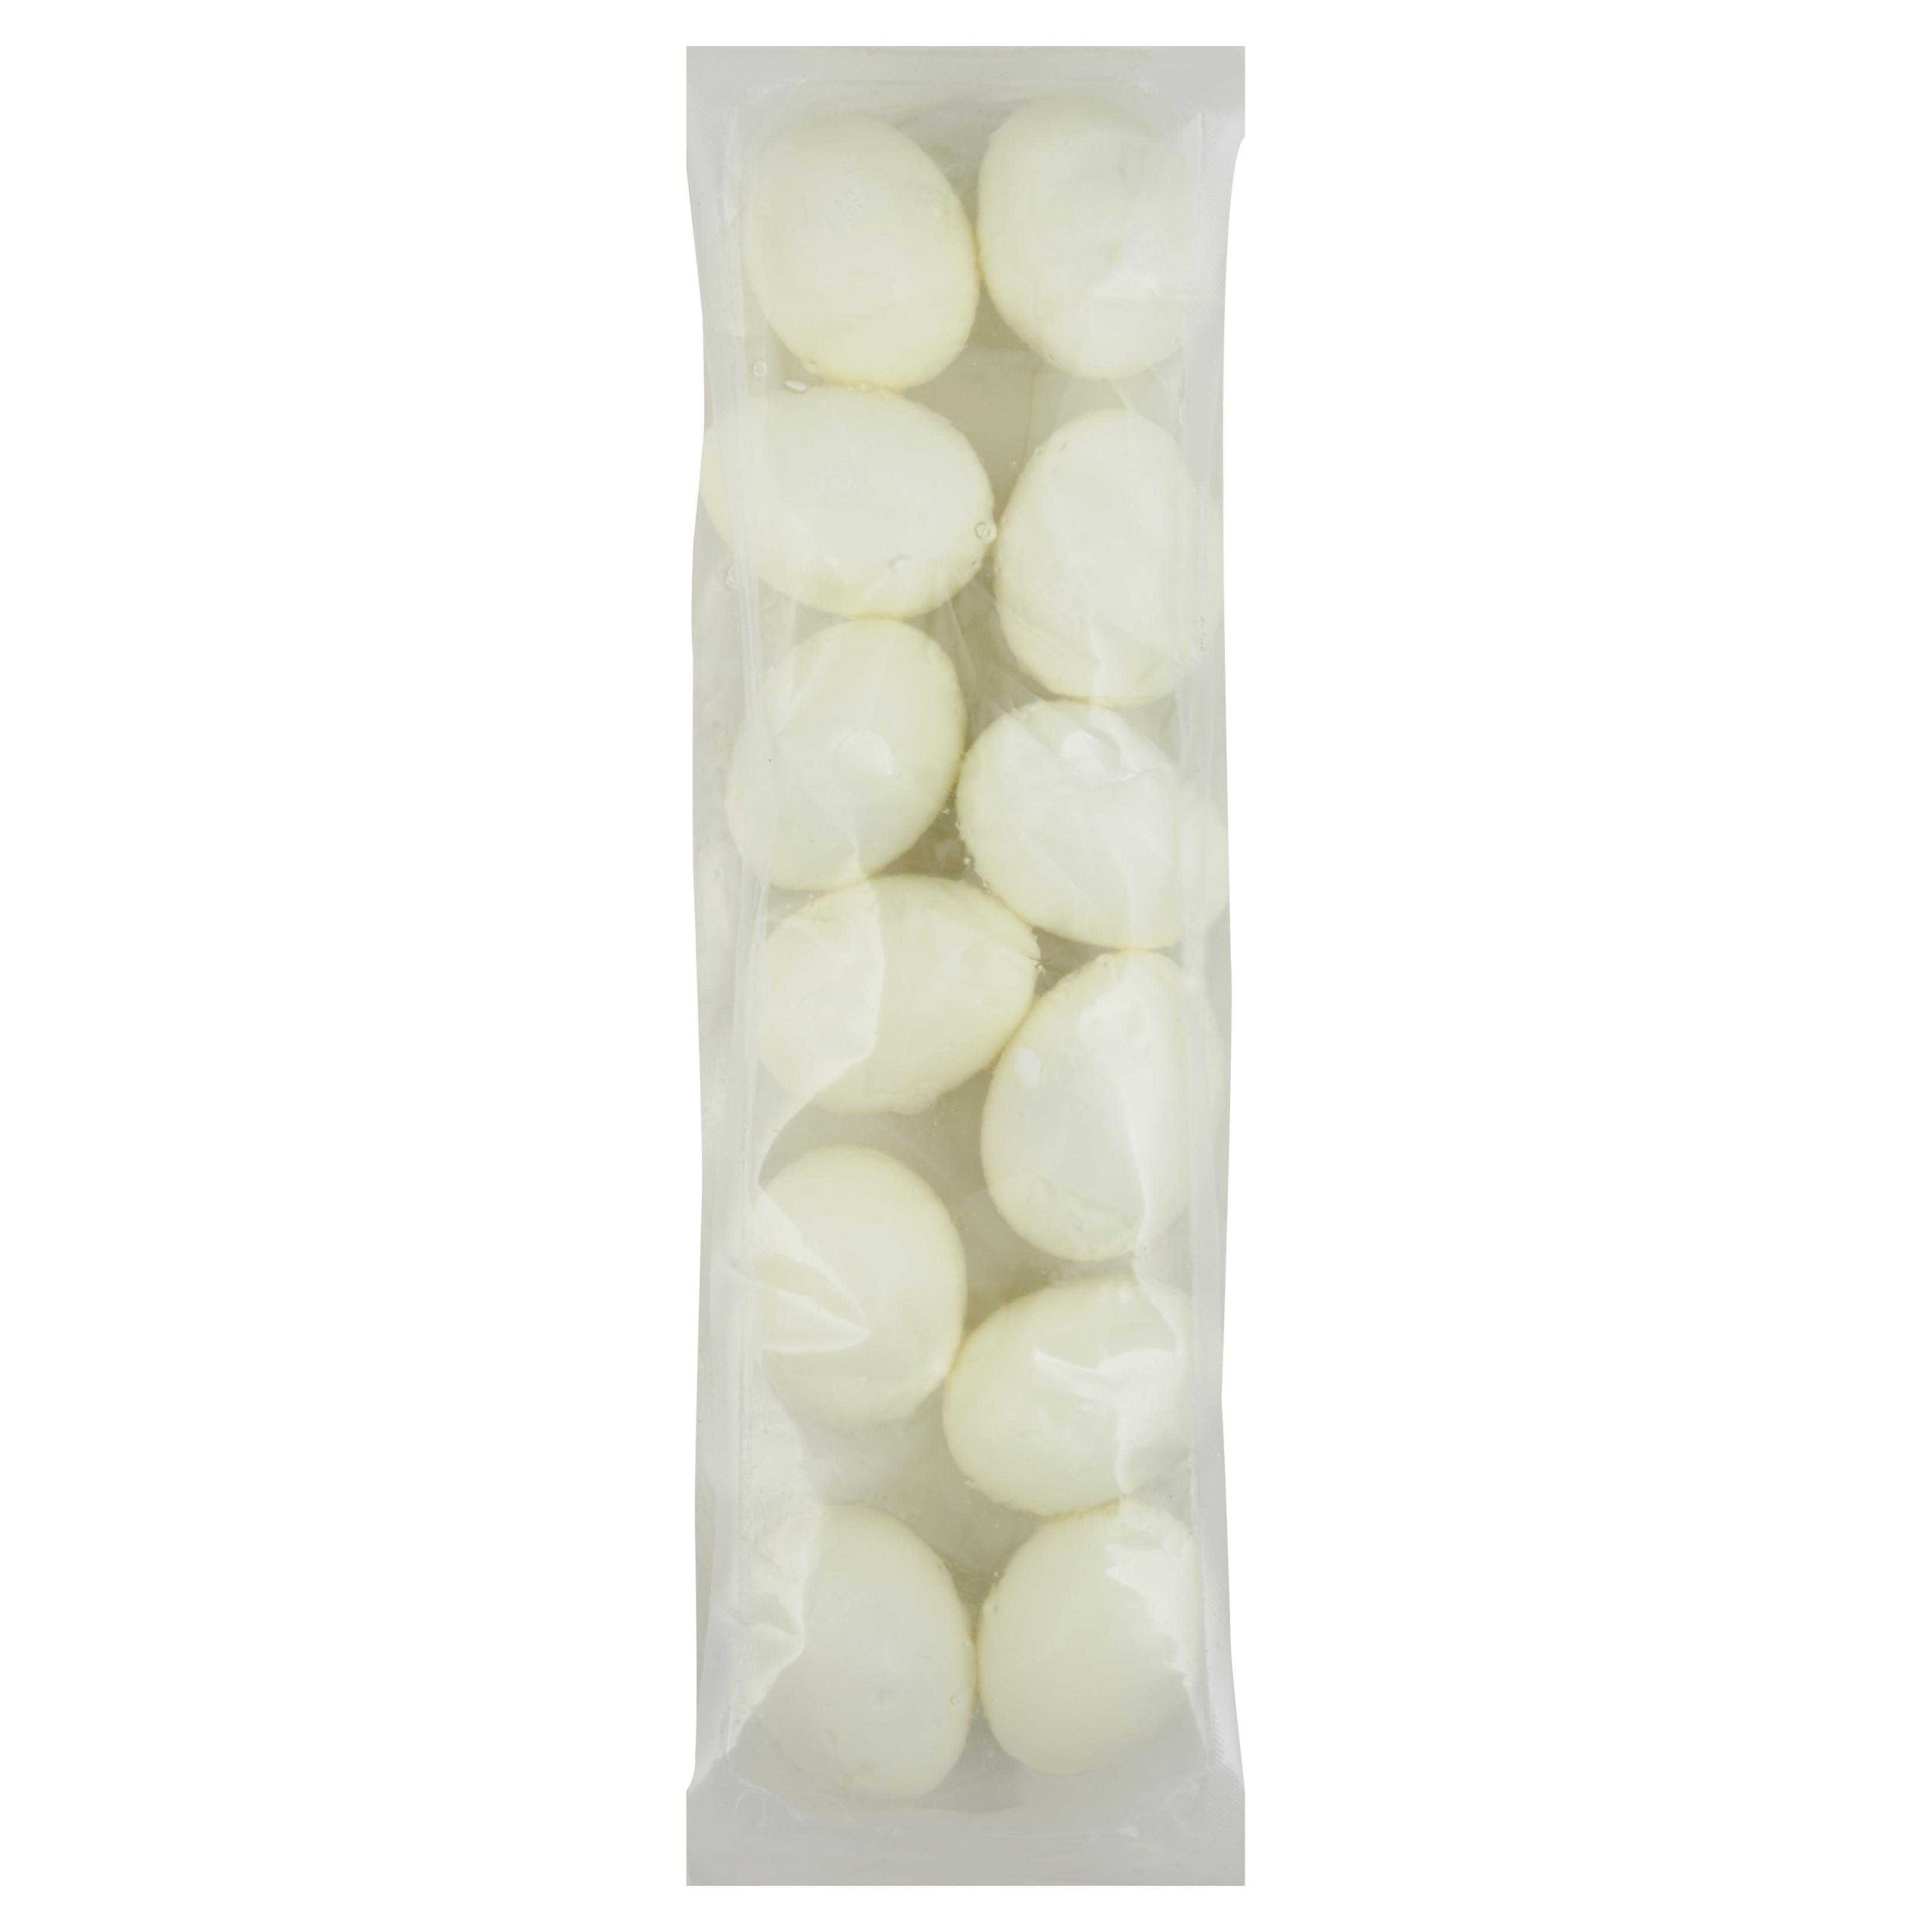 Papetti’s® Refrigerated Peeled Hard Cooked Eggs, 12/12 Count Dry Pack